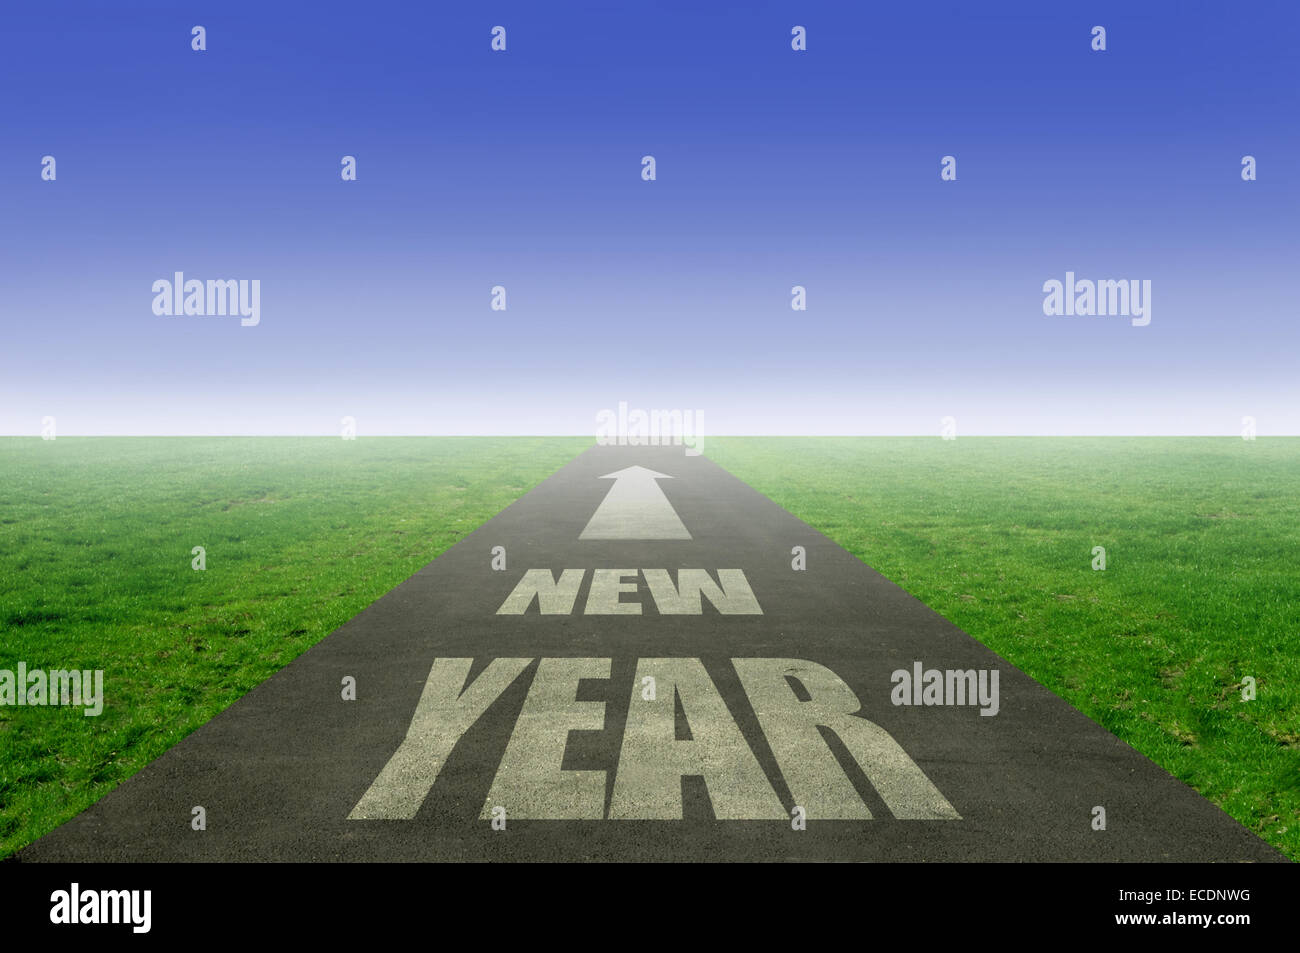 New year ahead, open road Stock Photo